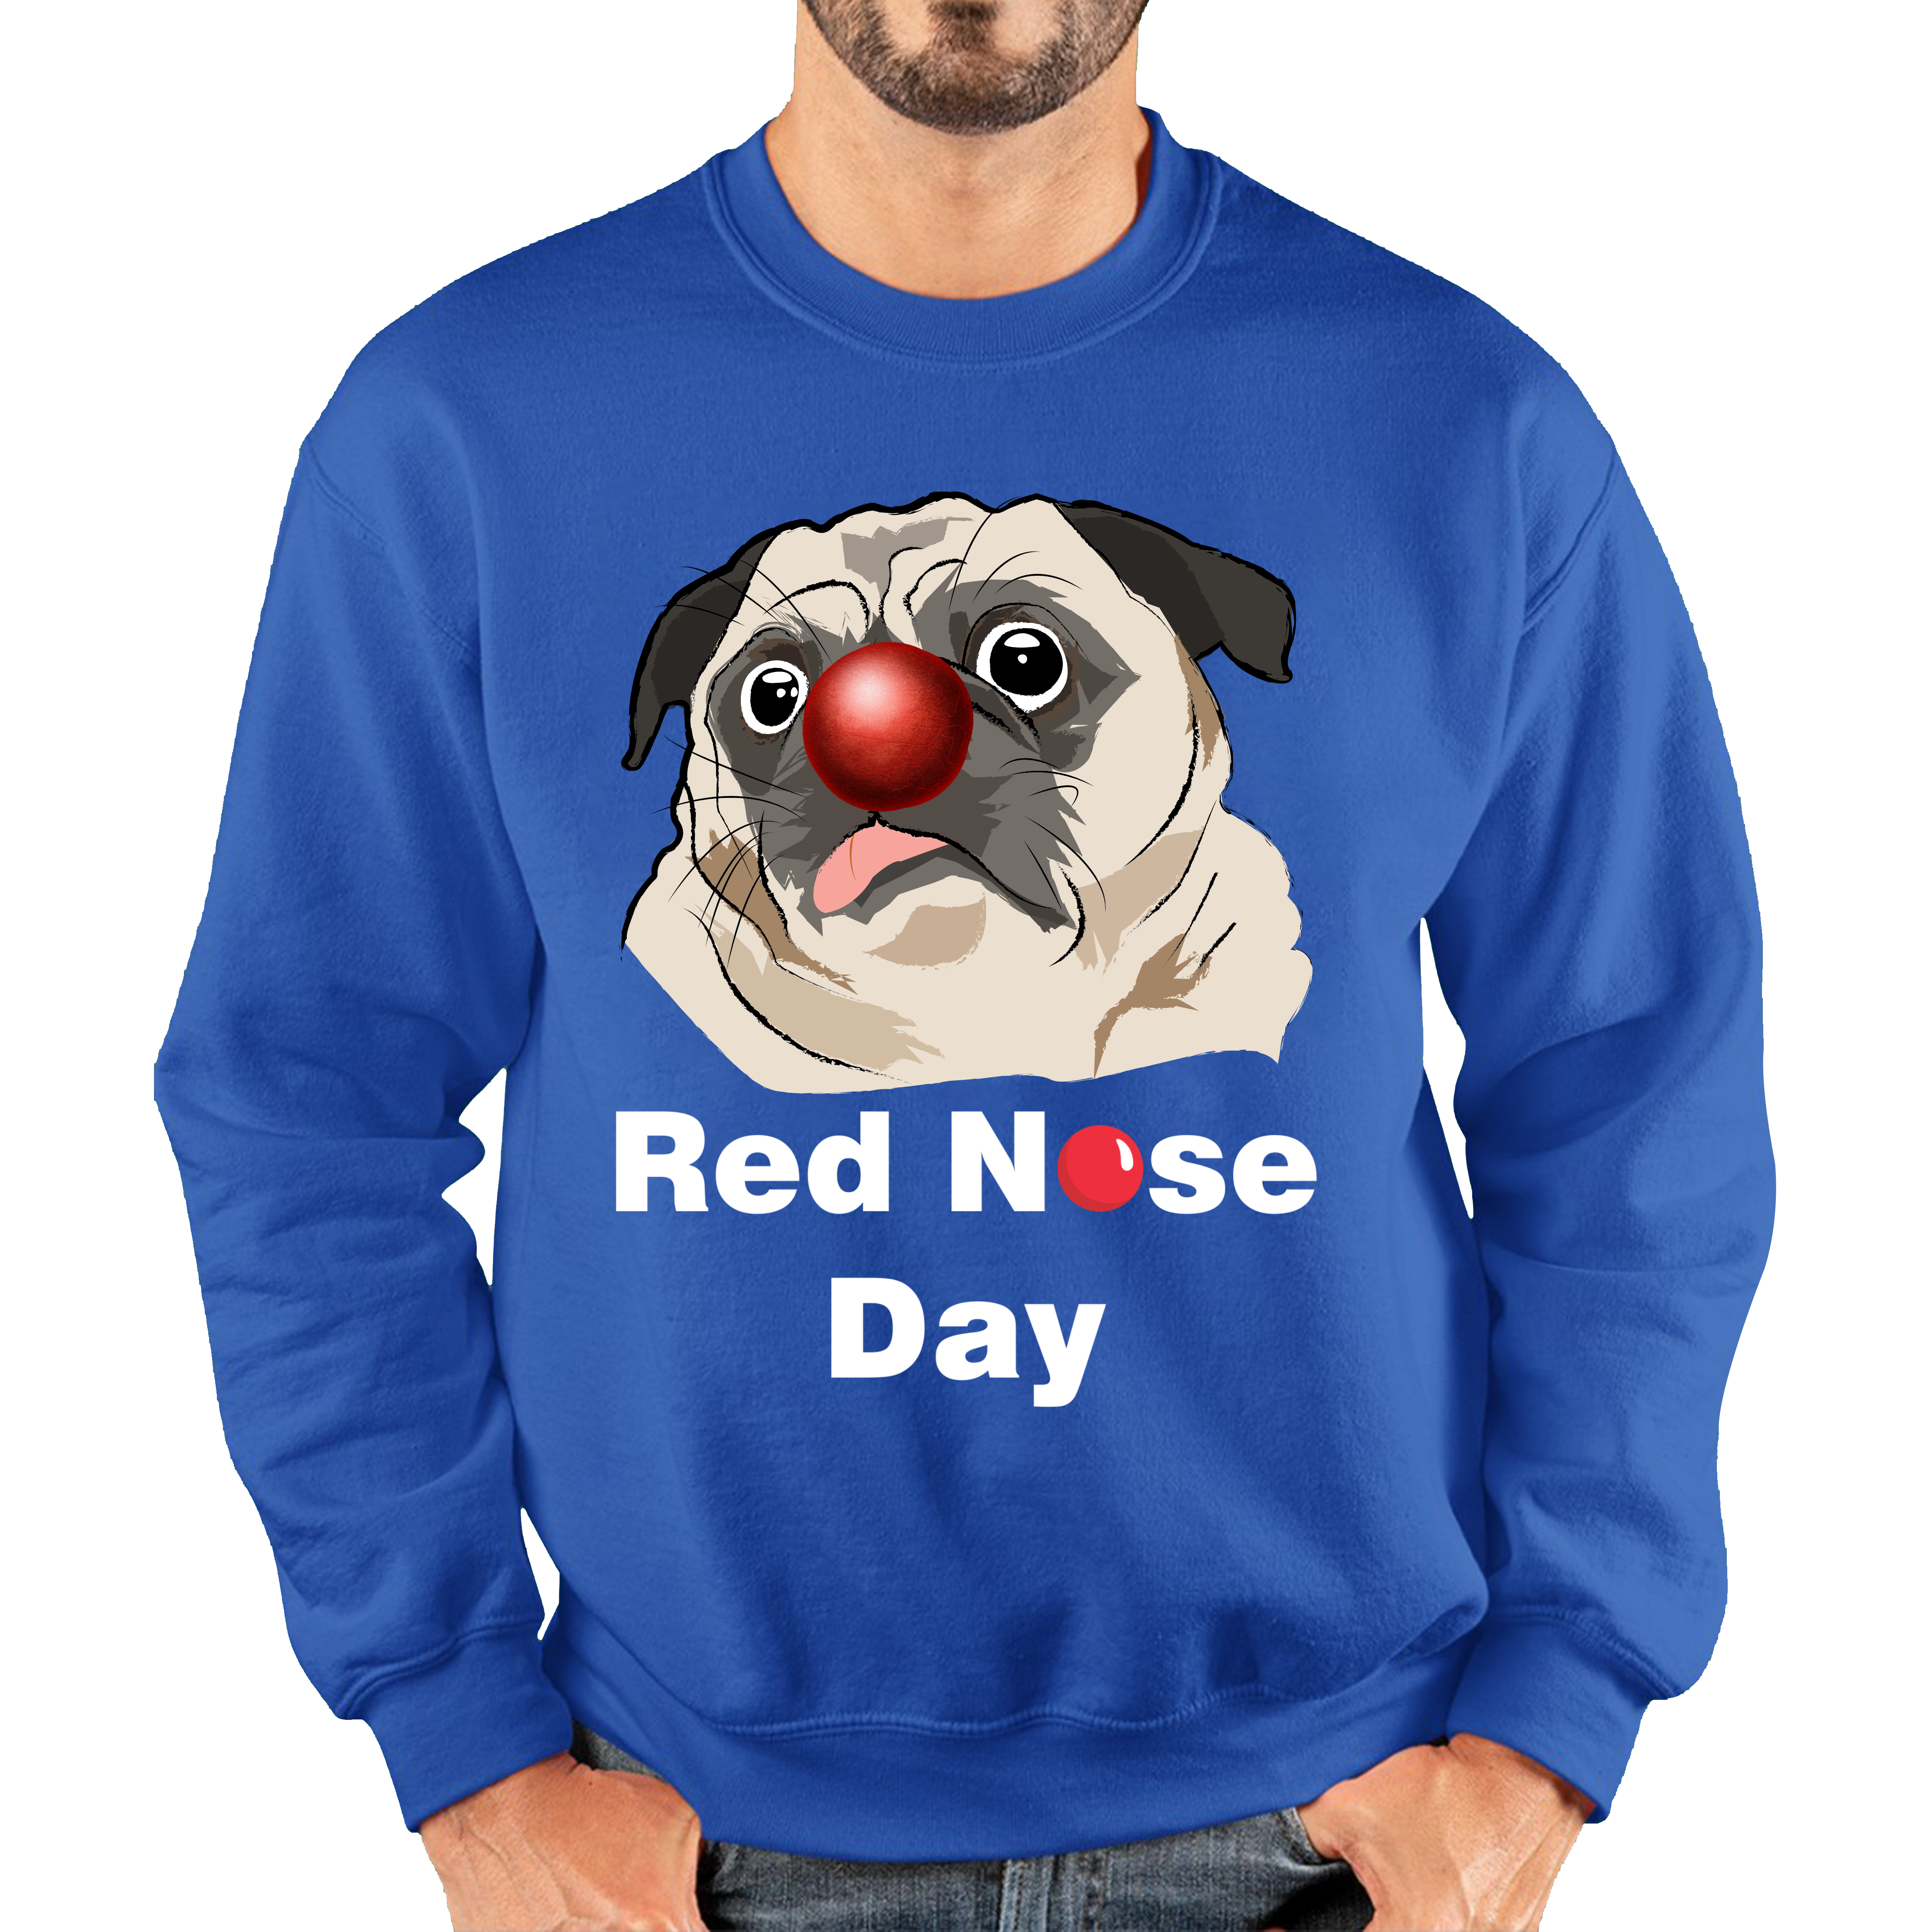 Pug Dog Red Nose Day Adult Sweatshirt. 50% Goes To Charity